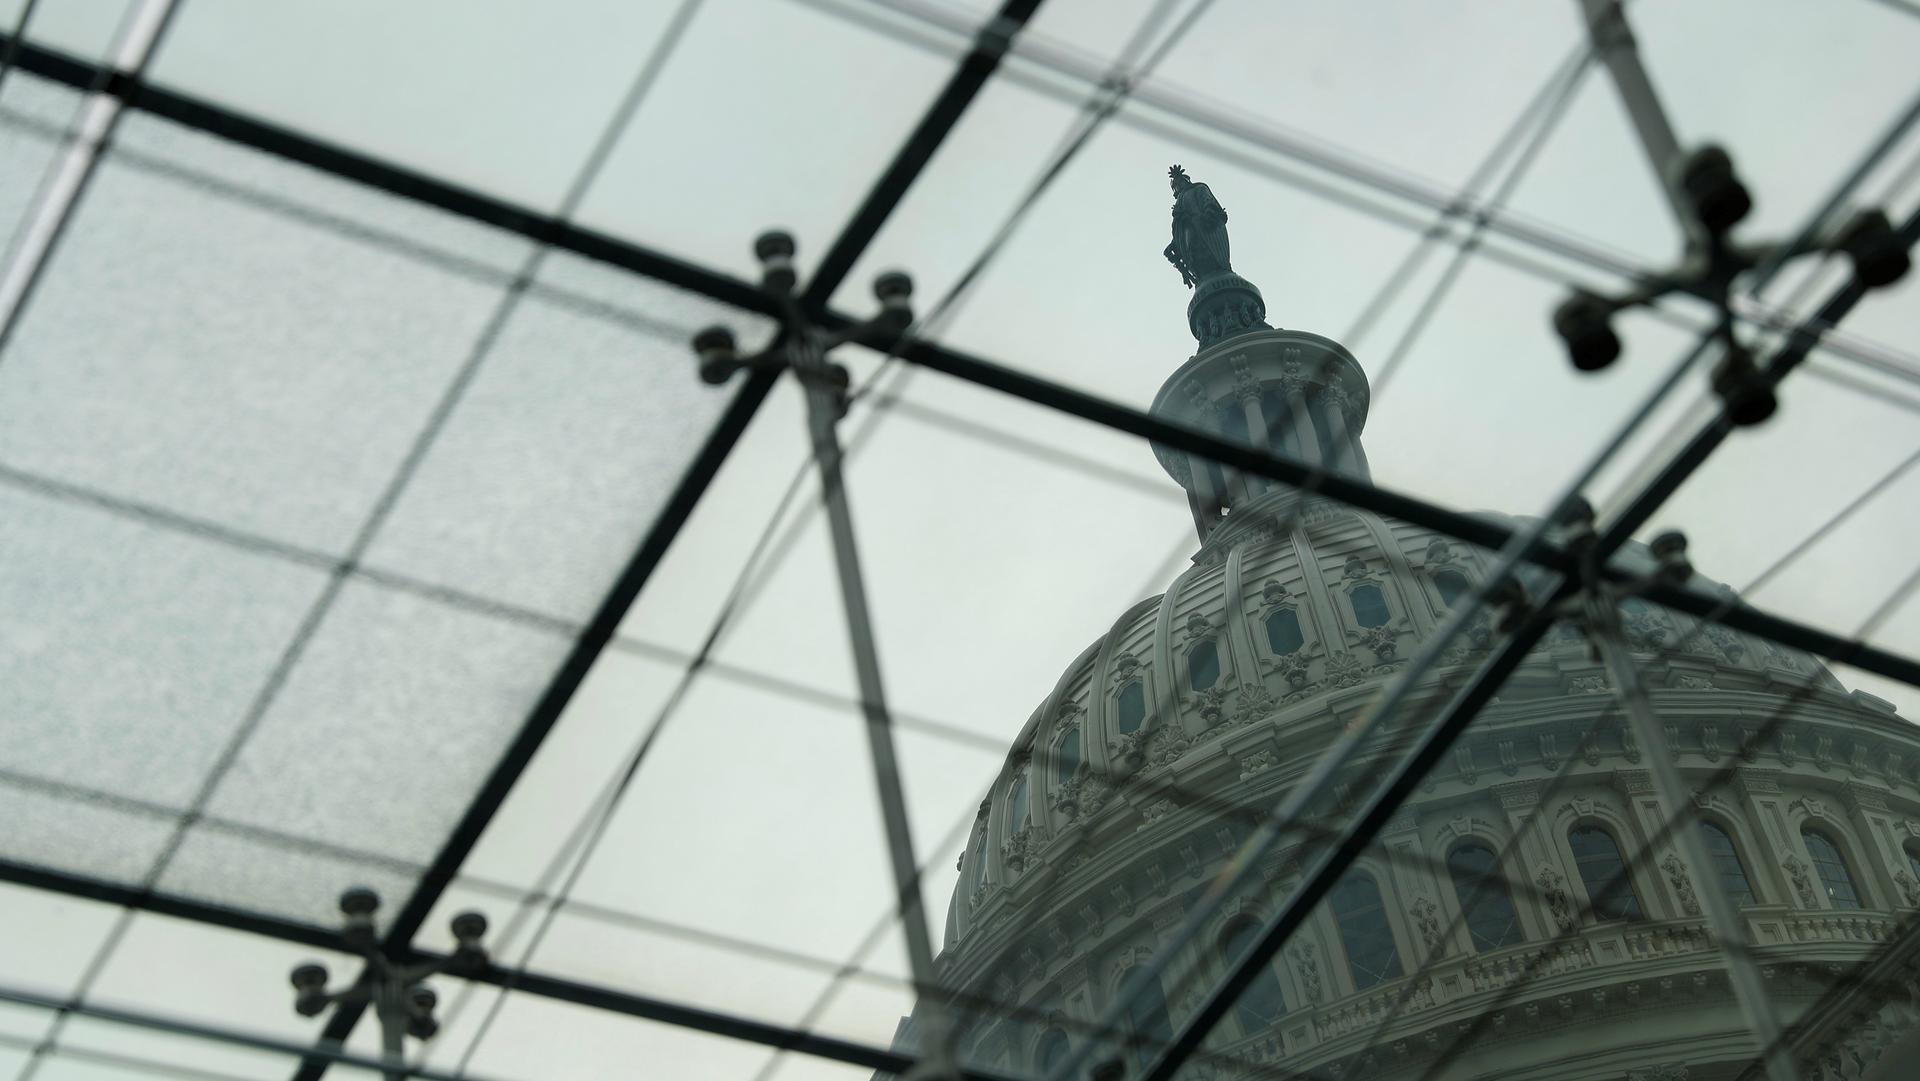 The US Capitol Building is seen from the Congressional Visitors Center in Washington, DC, Dec. 6, 2017.